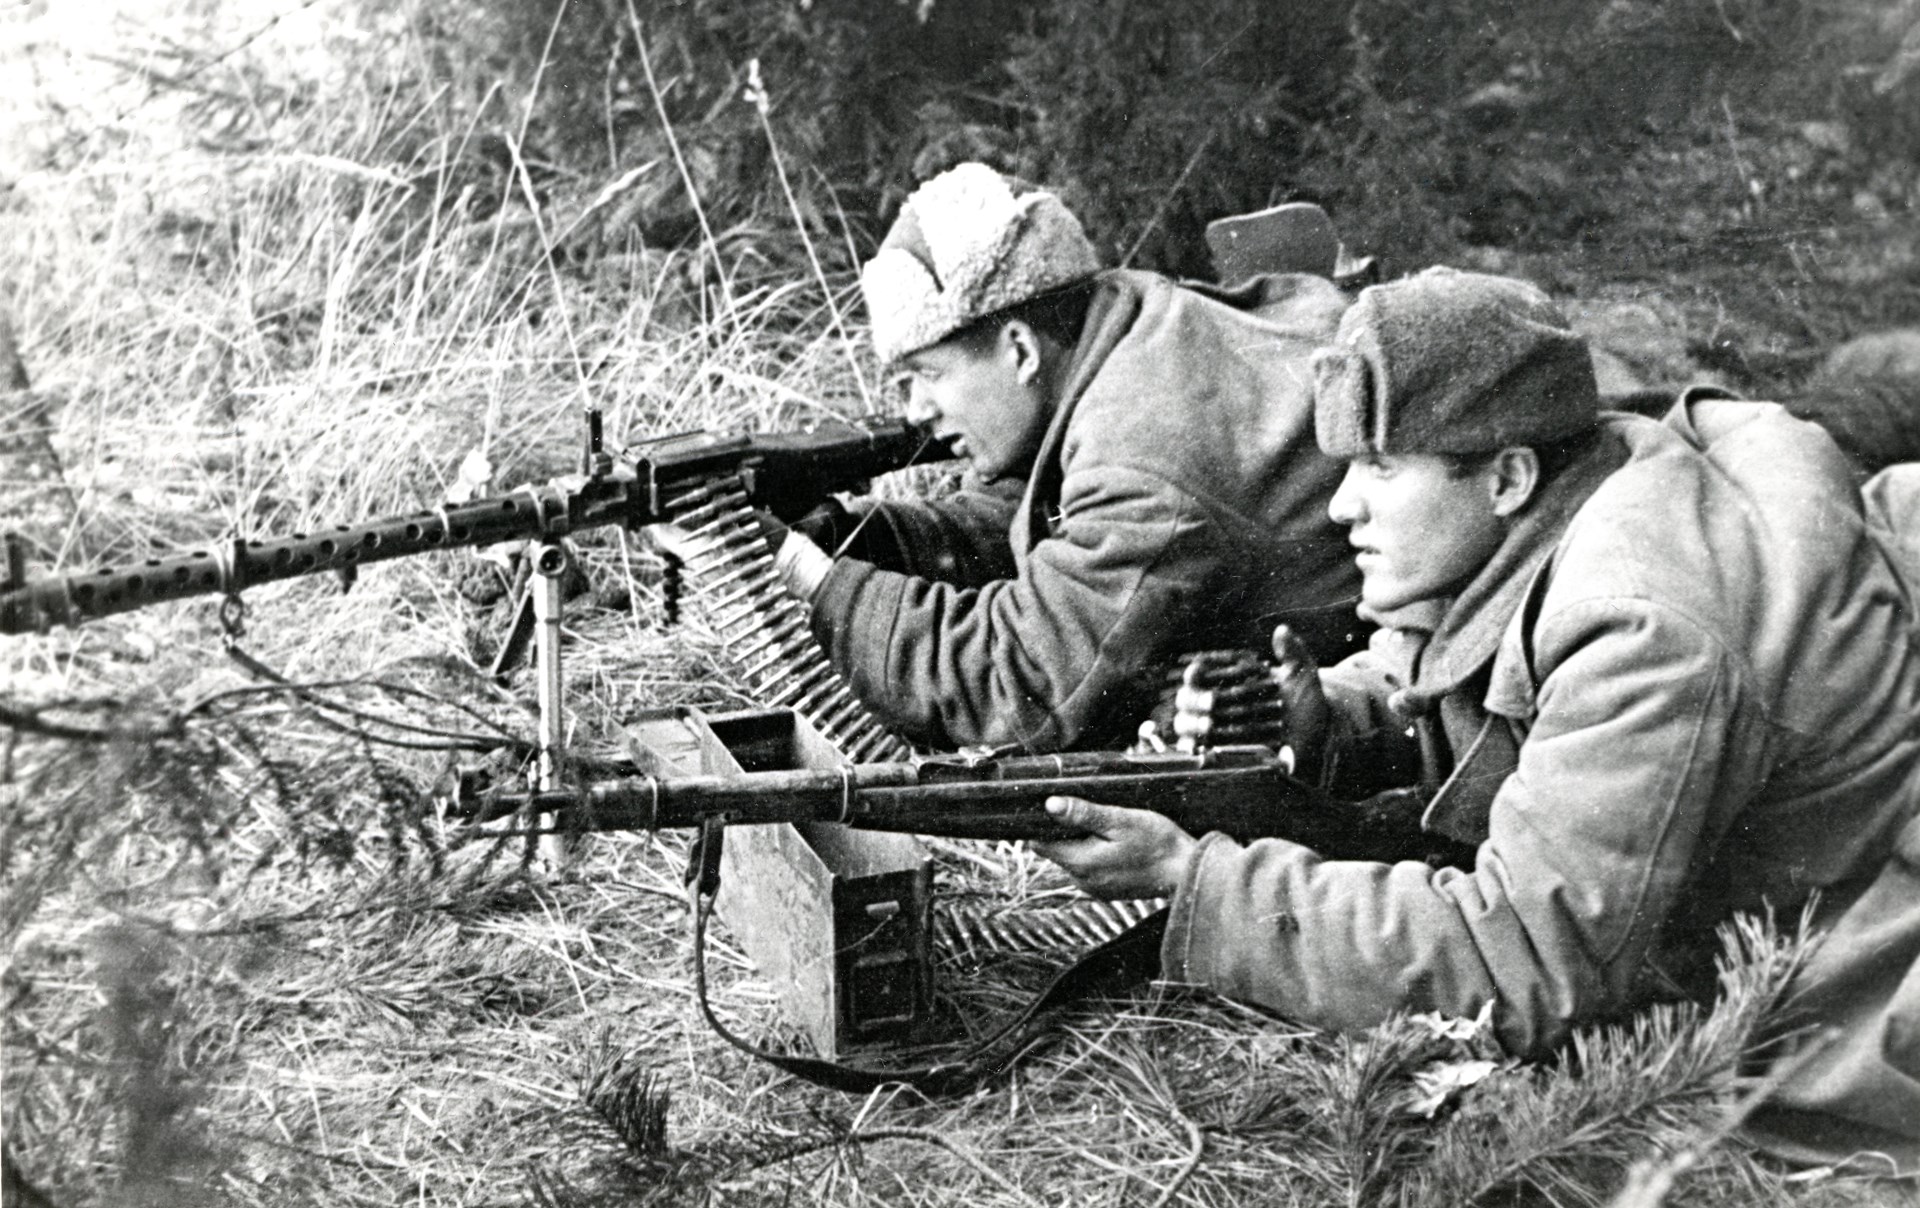 Captured firearms played an important role. Shown here, a German MG34 supports a partisan attack. The man alongside has a Mosin-Nagant Model 38 carbine. Author's collection